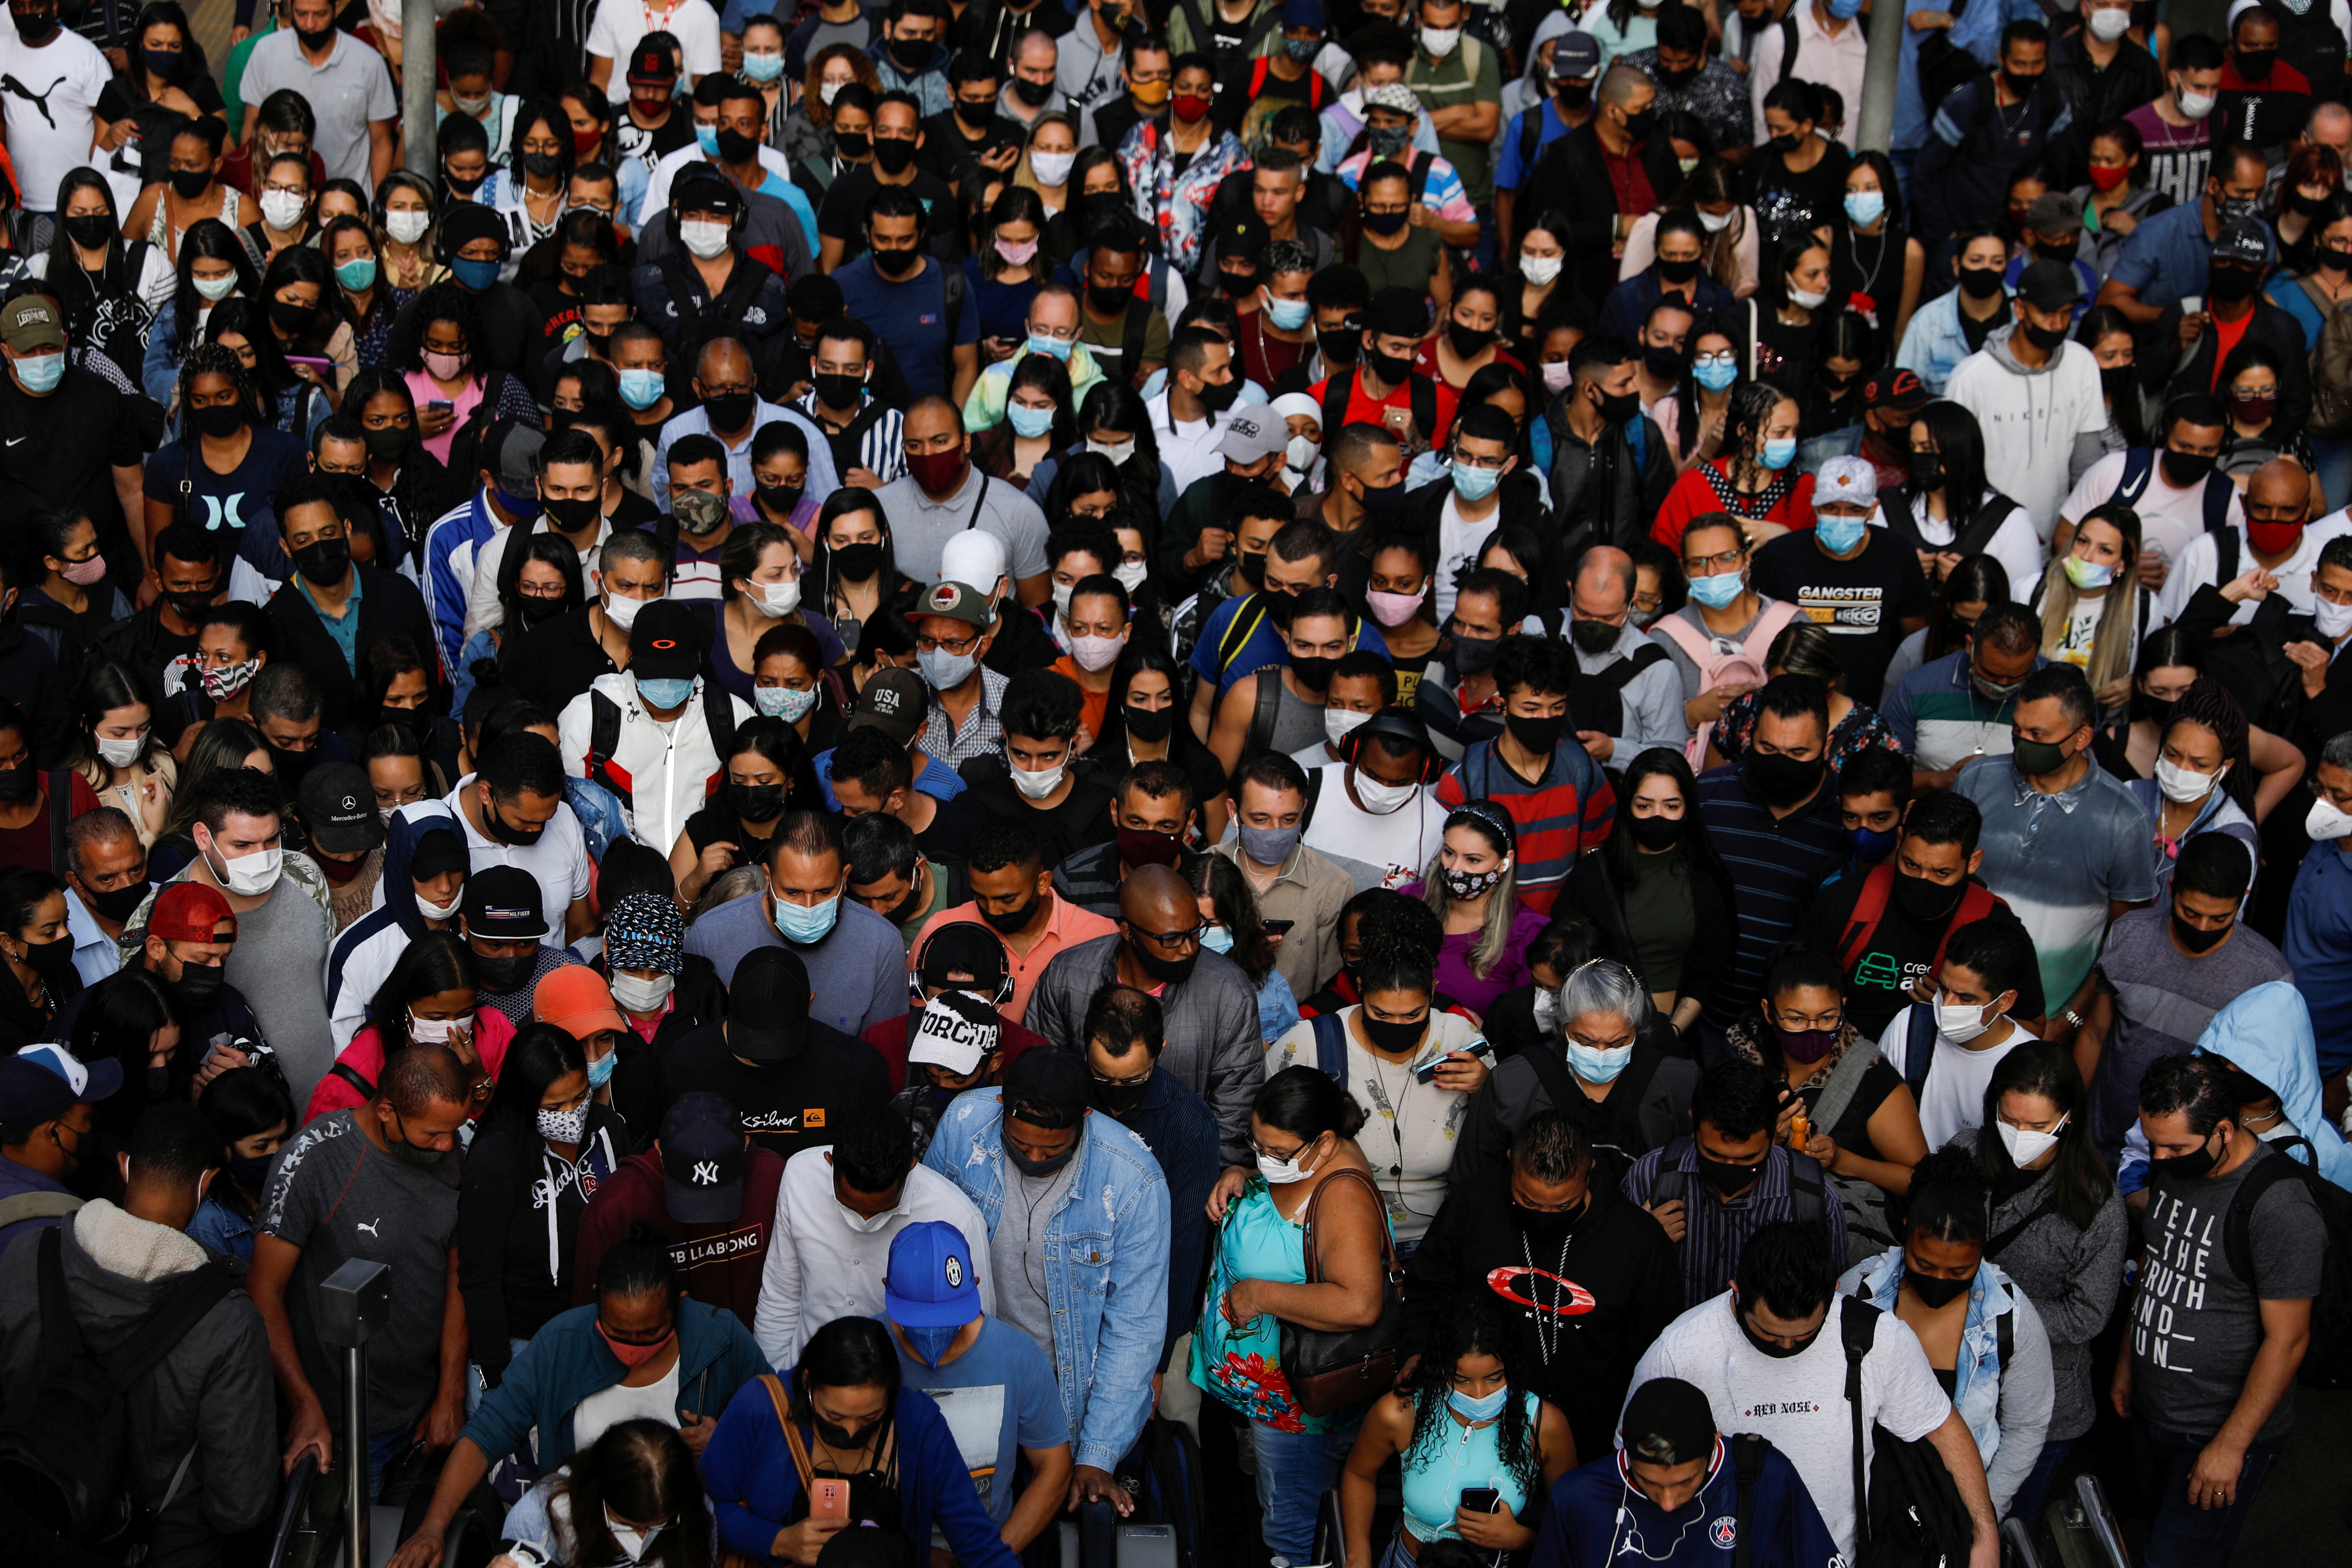 People walk after disembarking from a train at Luz station amid the outbreak of the coronavirus disease (COVID-19) and after Omicron has become the dominant coronavirus variant in the country, in Sao Paulo, Brazil January 12, 2022. REUTERS/Amanda Perobelli